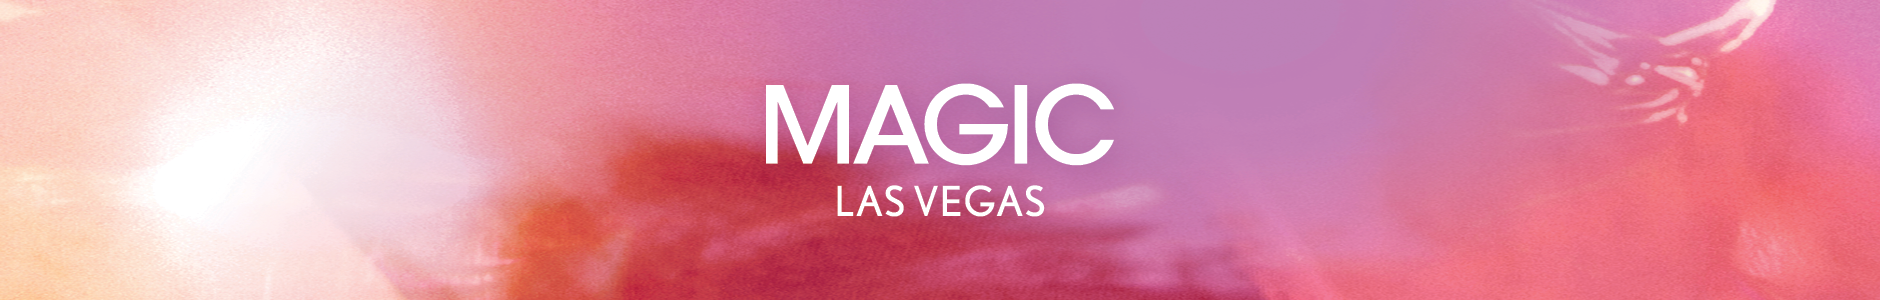 Magic las vegas banner with red background